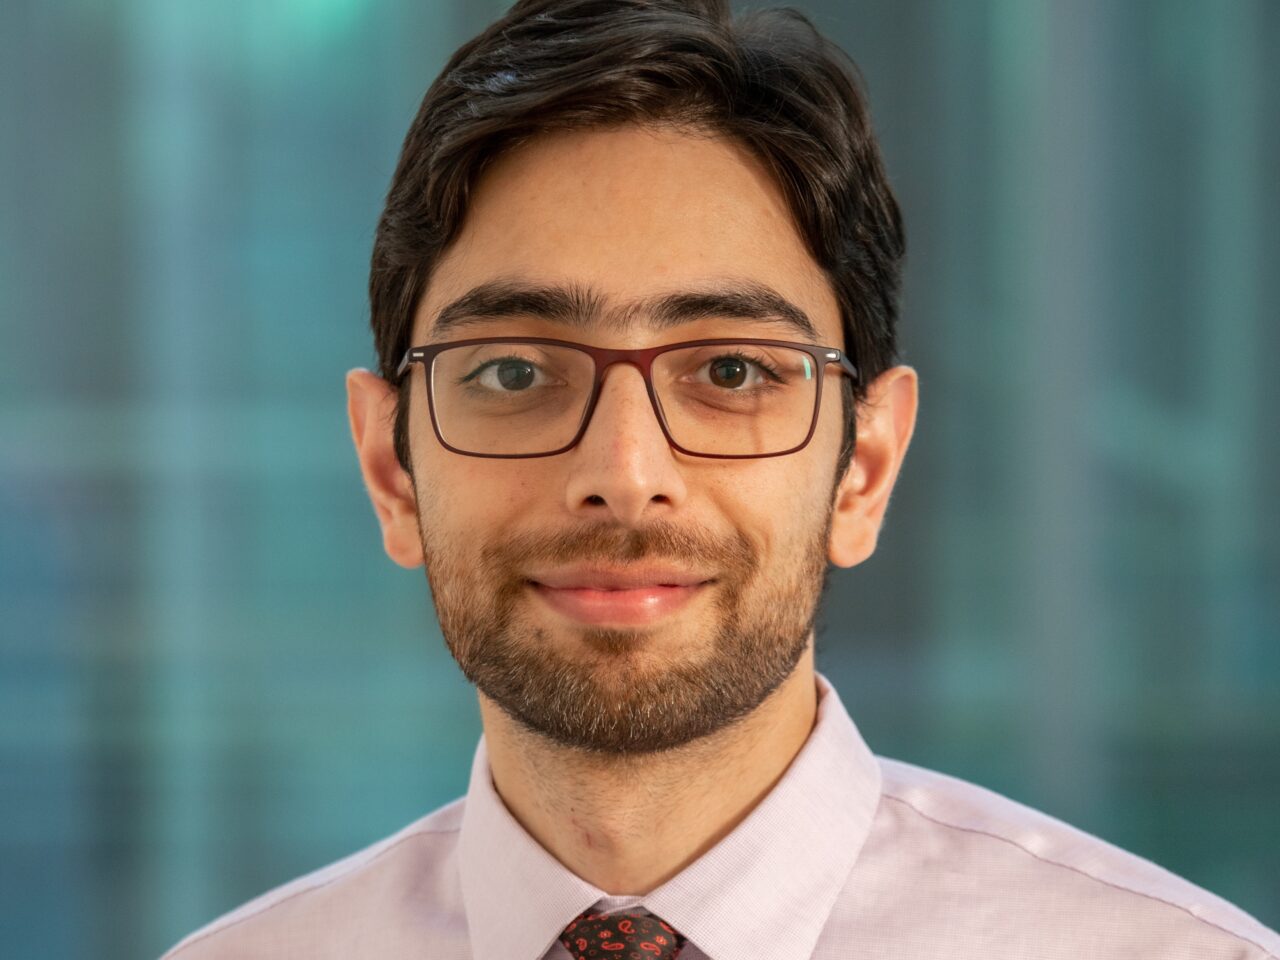 Rafeh Naqash: An absolute pleasure working with the JCO Precision Oncology as social media editor